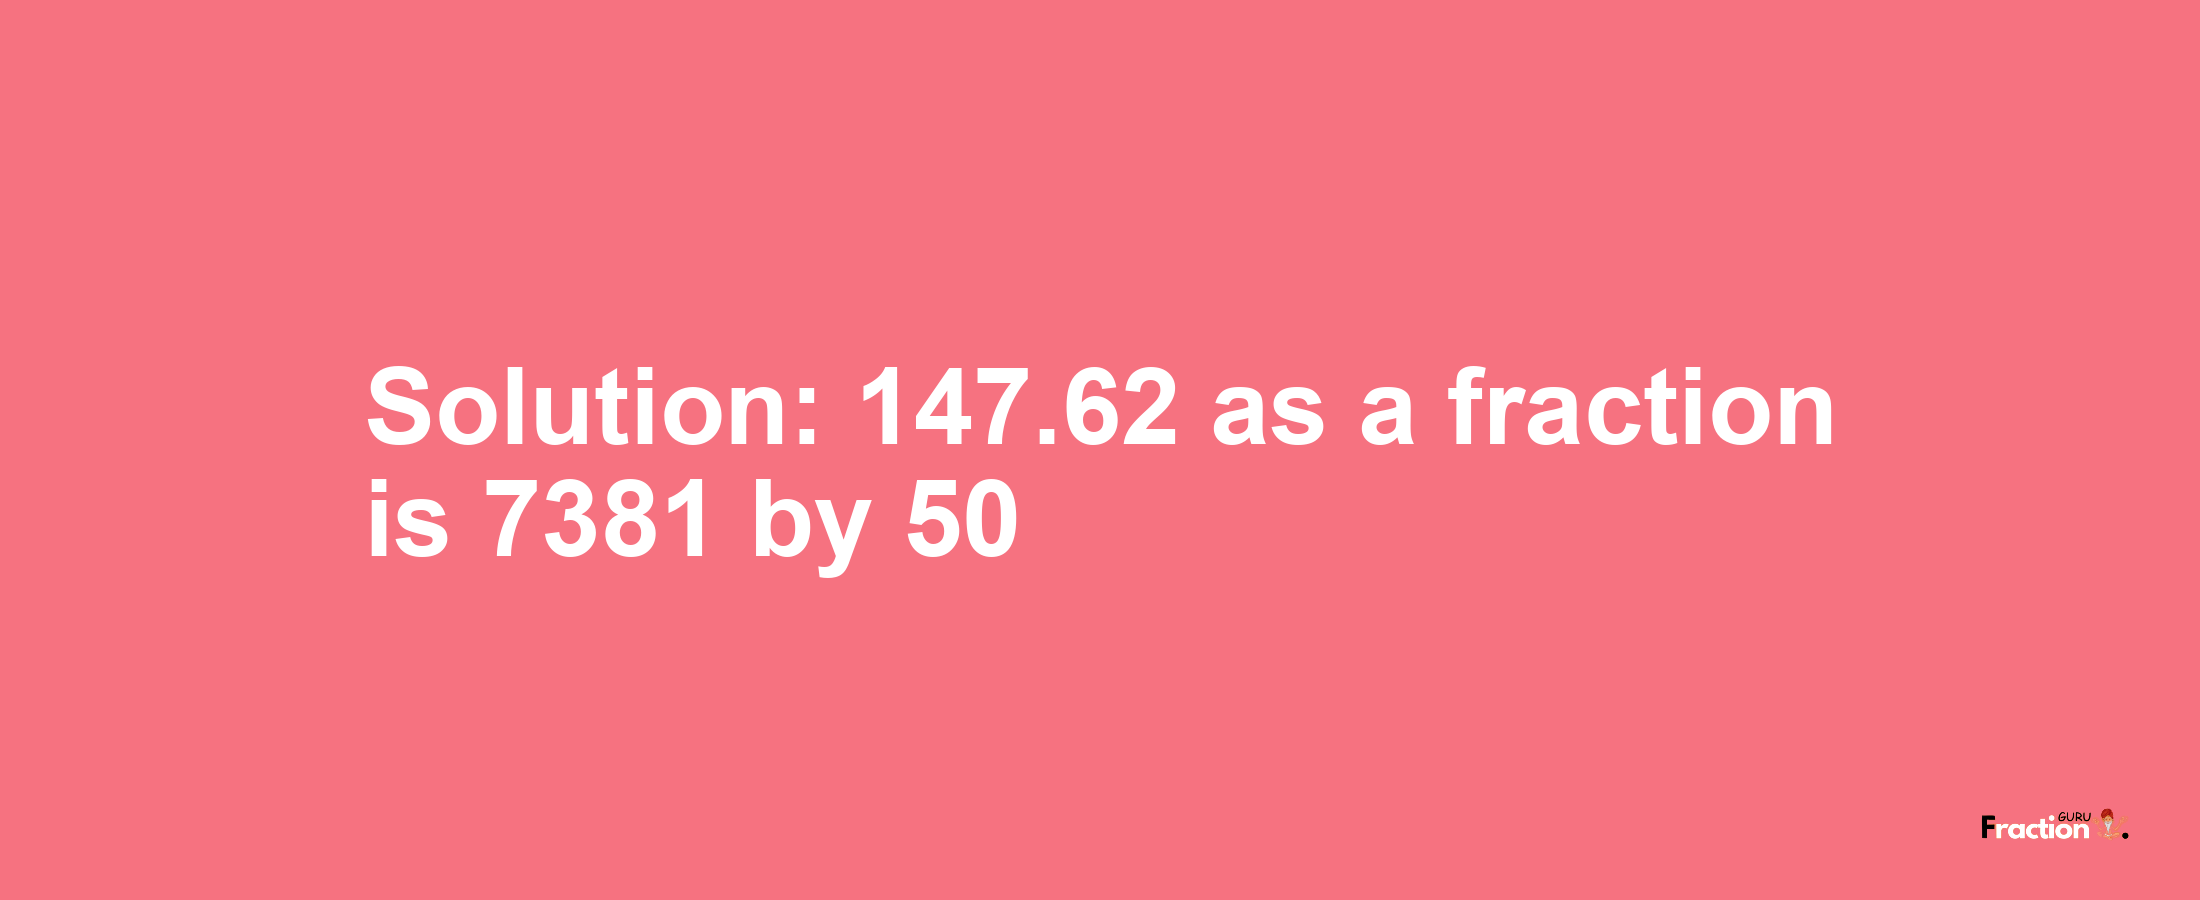 Solution:147.62 as a fraction is 7381/50